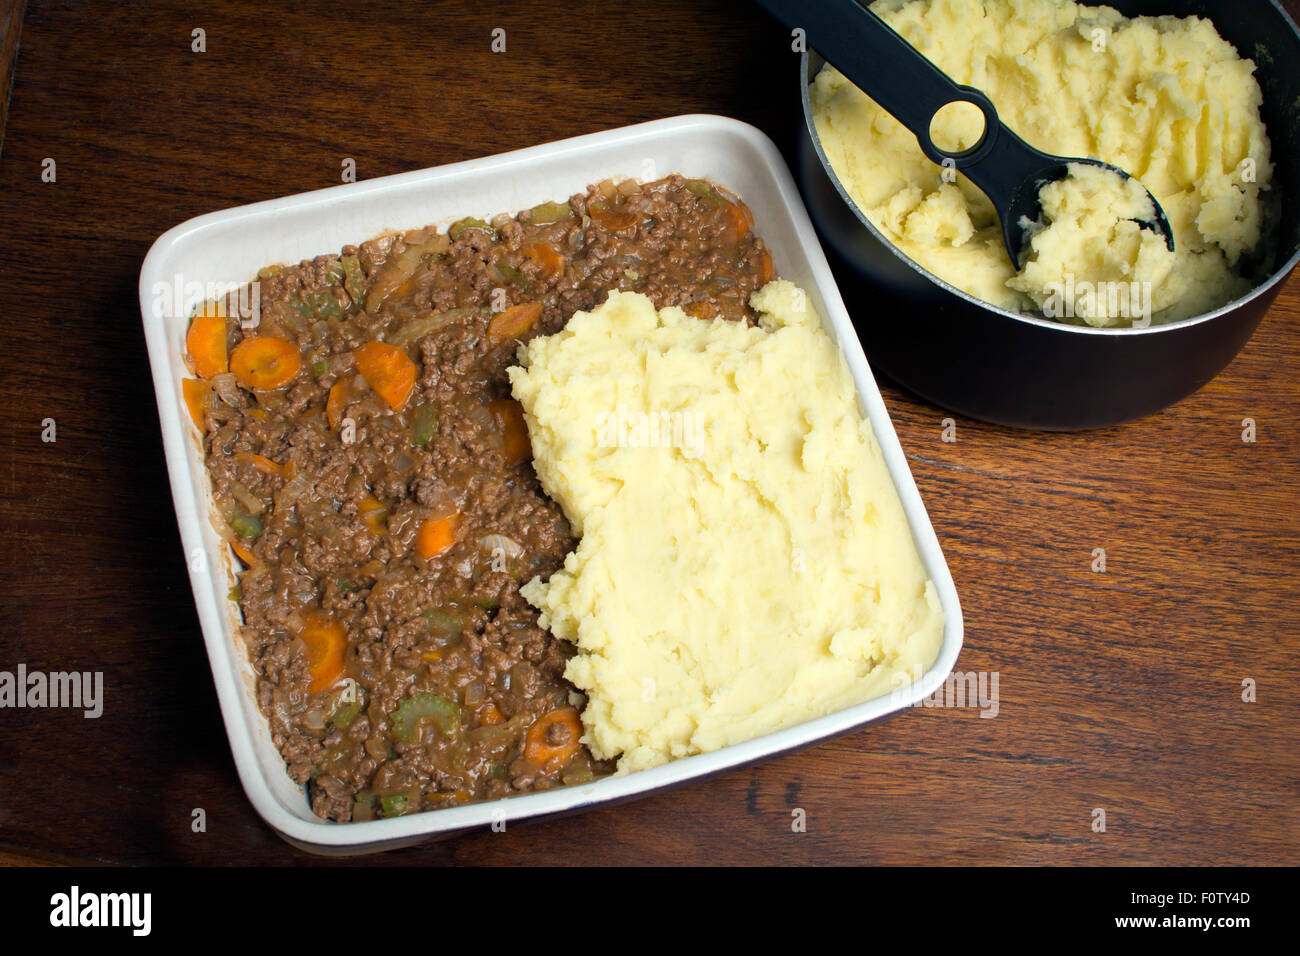 The layer of mashed potato going on the top of a shepherd's pie Stock Photo